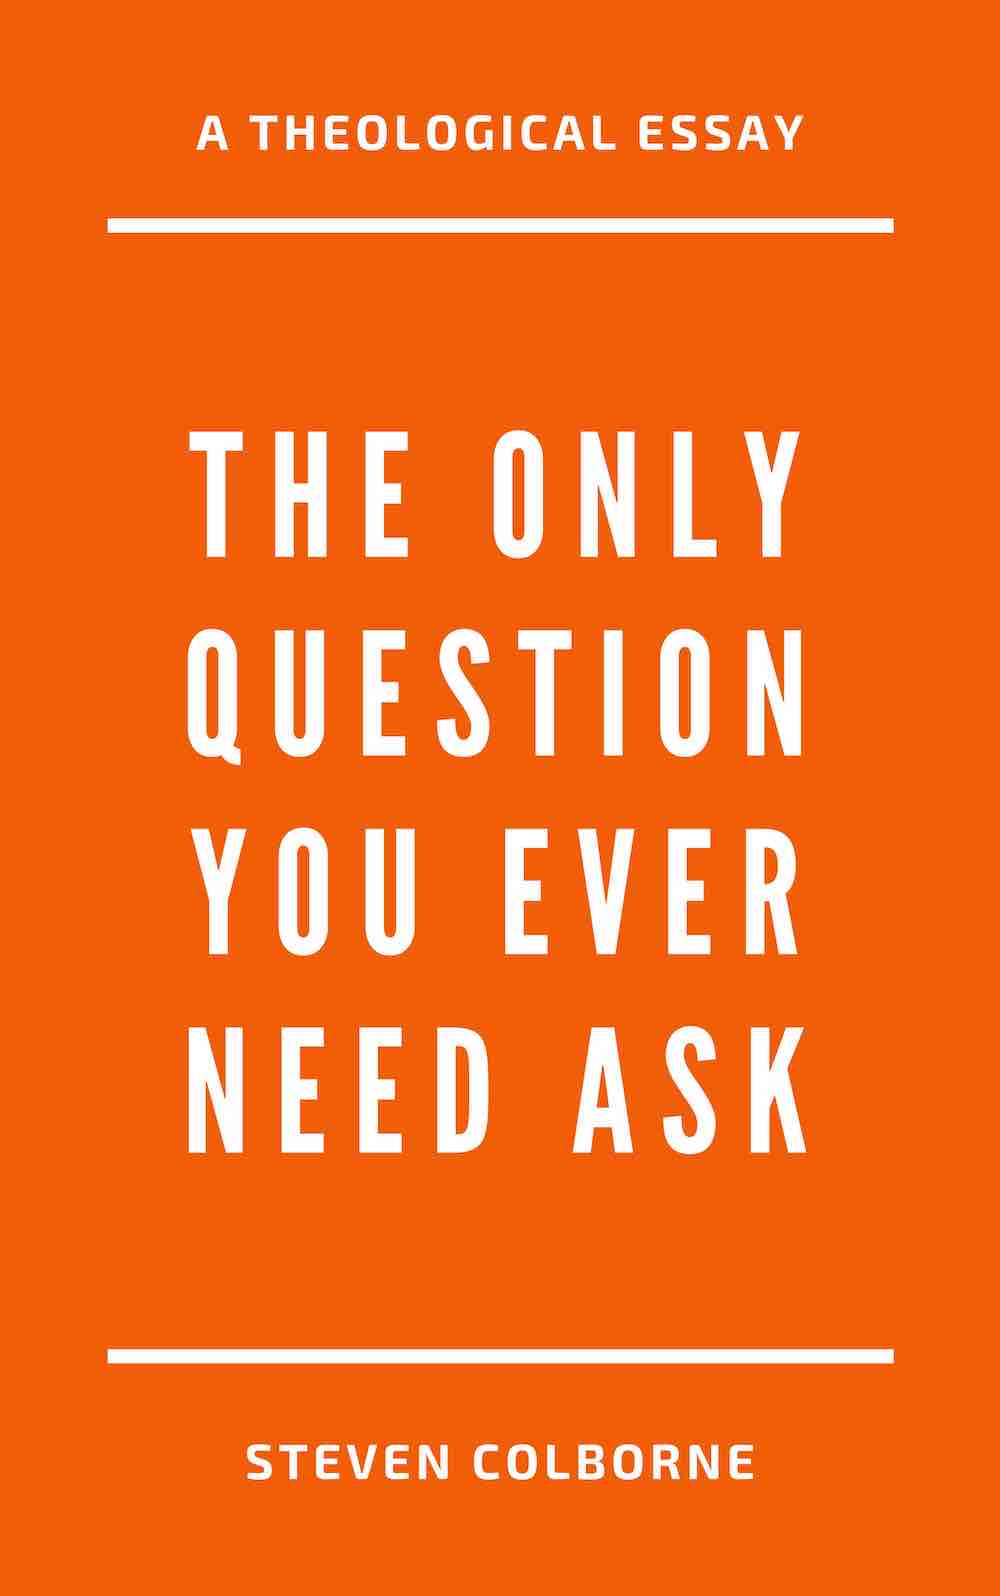 The Only Question You Ever Need Ask (eBook)